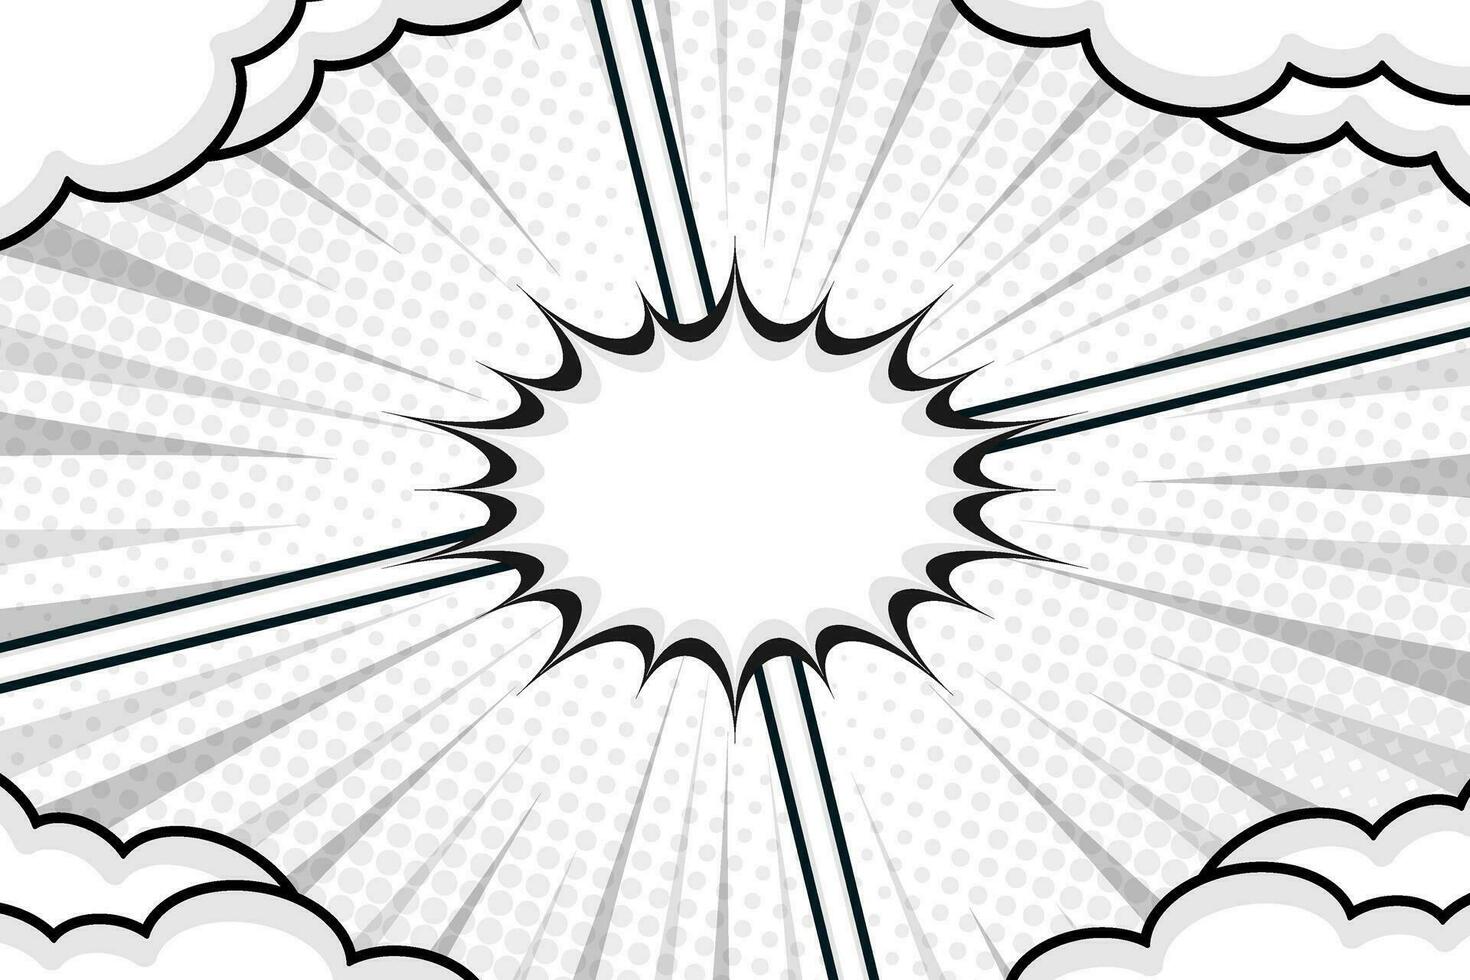 Blank comic book scene frame background template with cloud vector